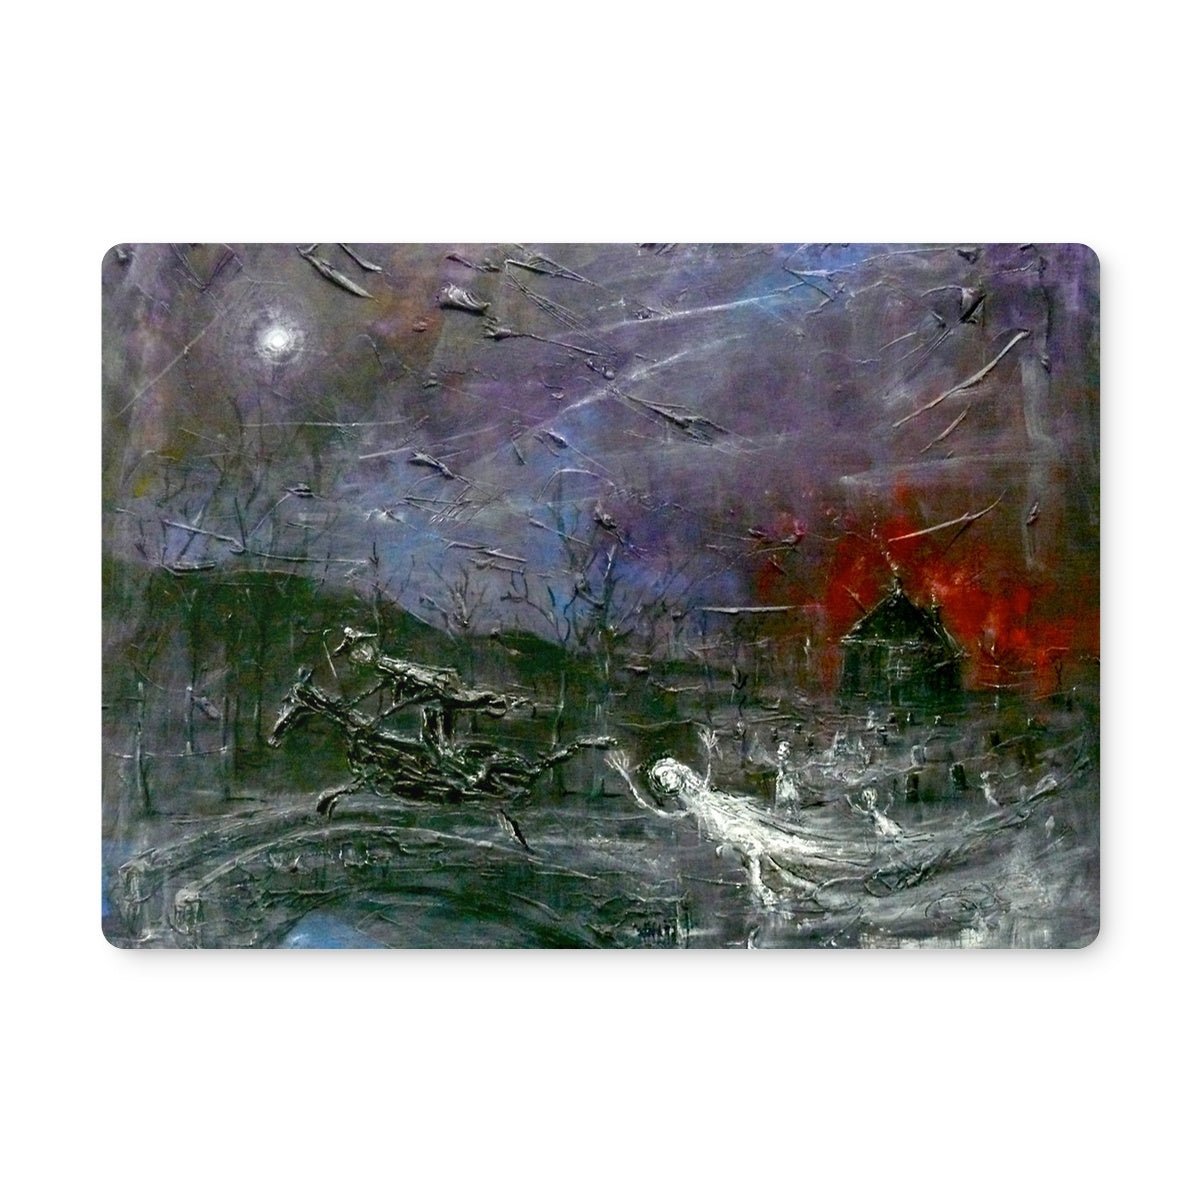 Tam O Shanter Art Gifts Placemat-Placemats-Abstract & Impressionistic Art Gallery-4 Placemats-Paintings, Prints, Homeware, Art Gifts From Scotland By Scottish Artist Kevin Hunter